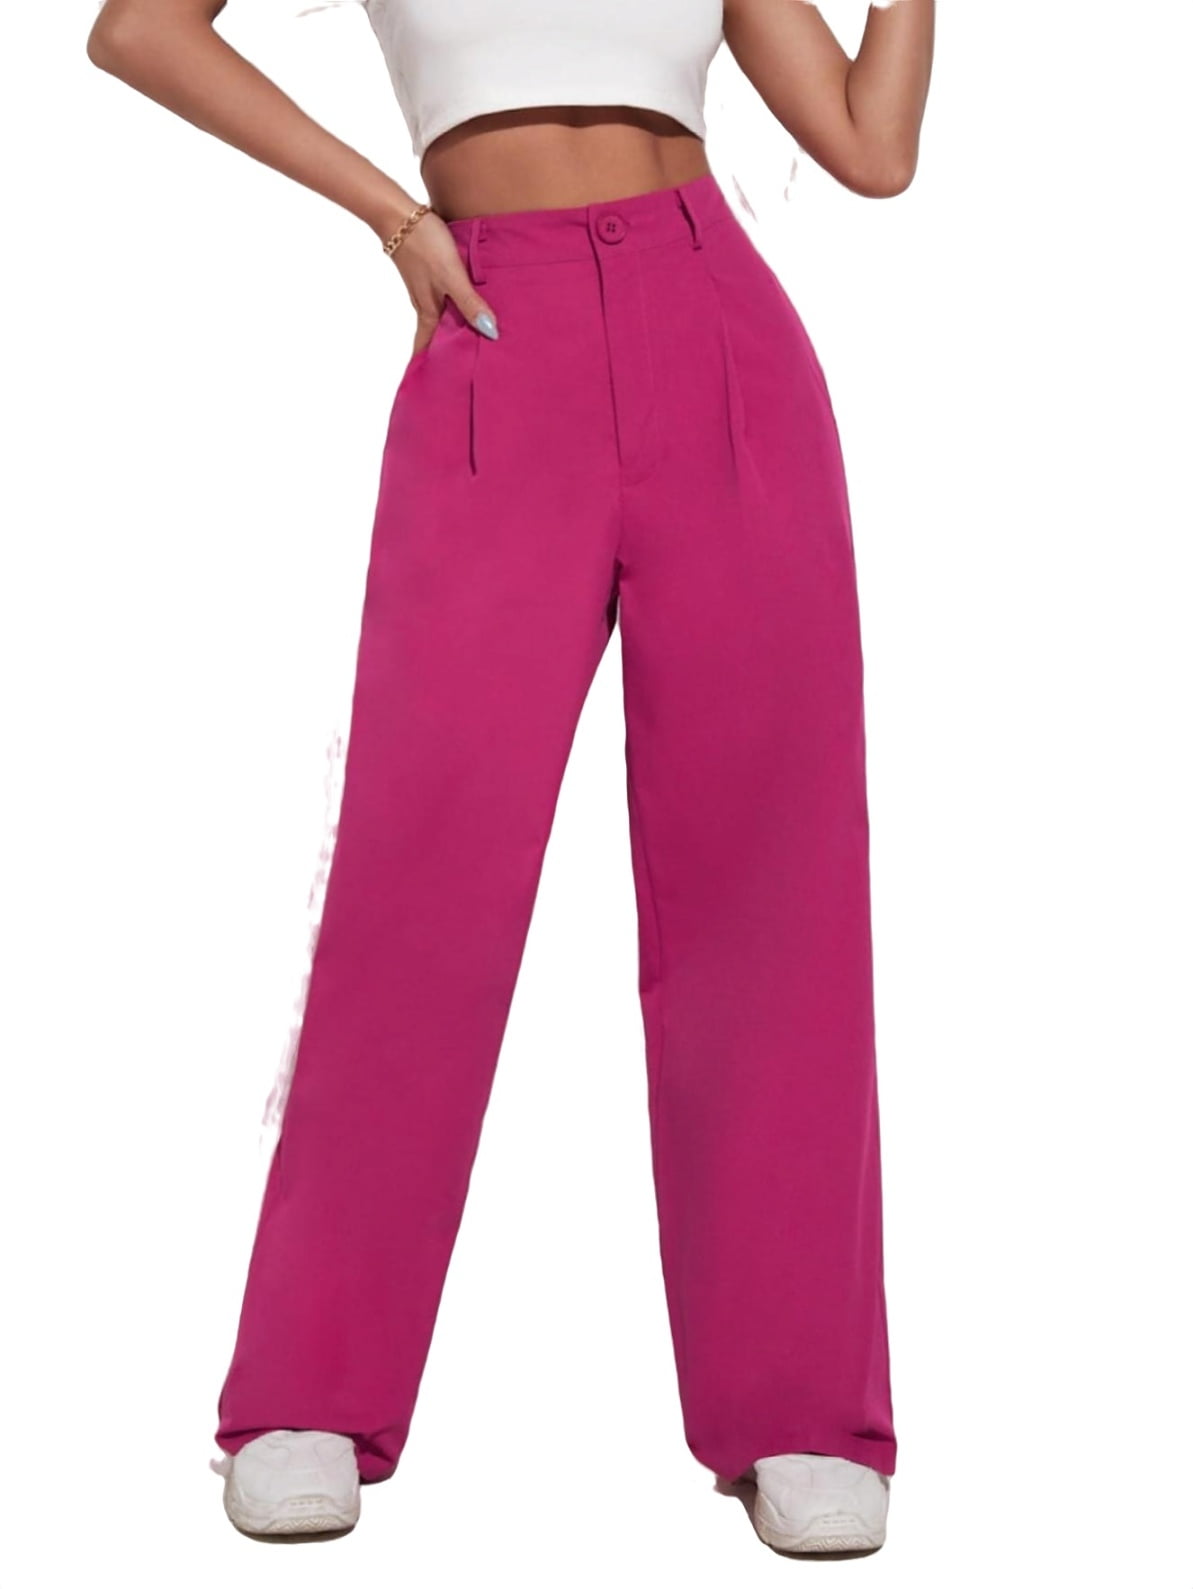 HBFAGFB Casual Pants for Women Plus Size High Waisted Wide Leg Flowy  Trousers with Pocket Hot Pink Size M - Walmart.com